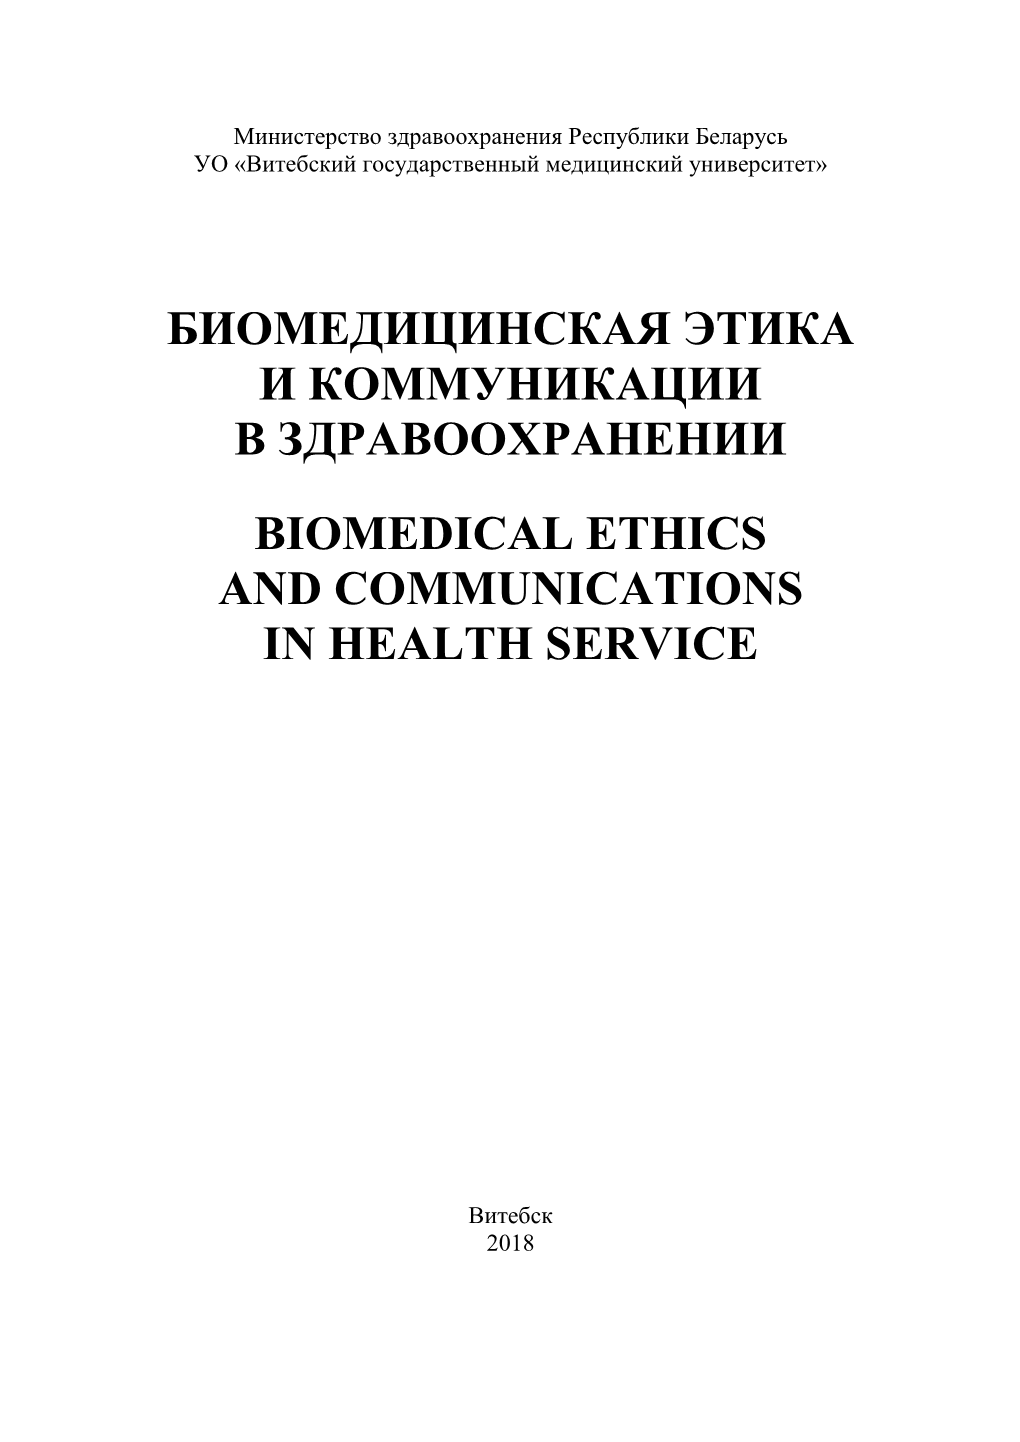 Biomedical Ethics and Communications in Health Service